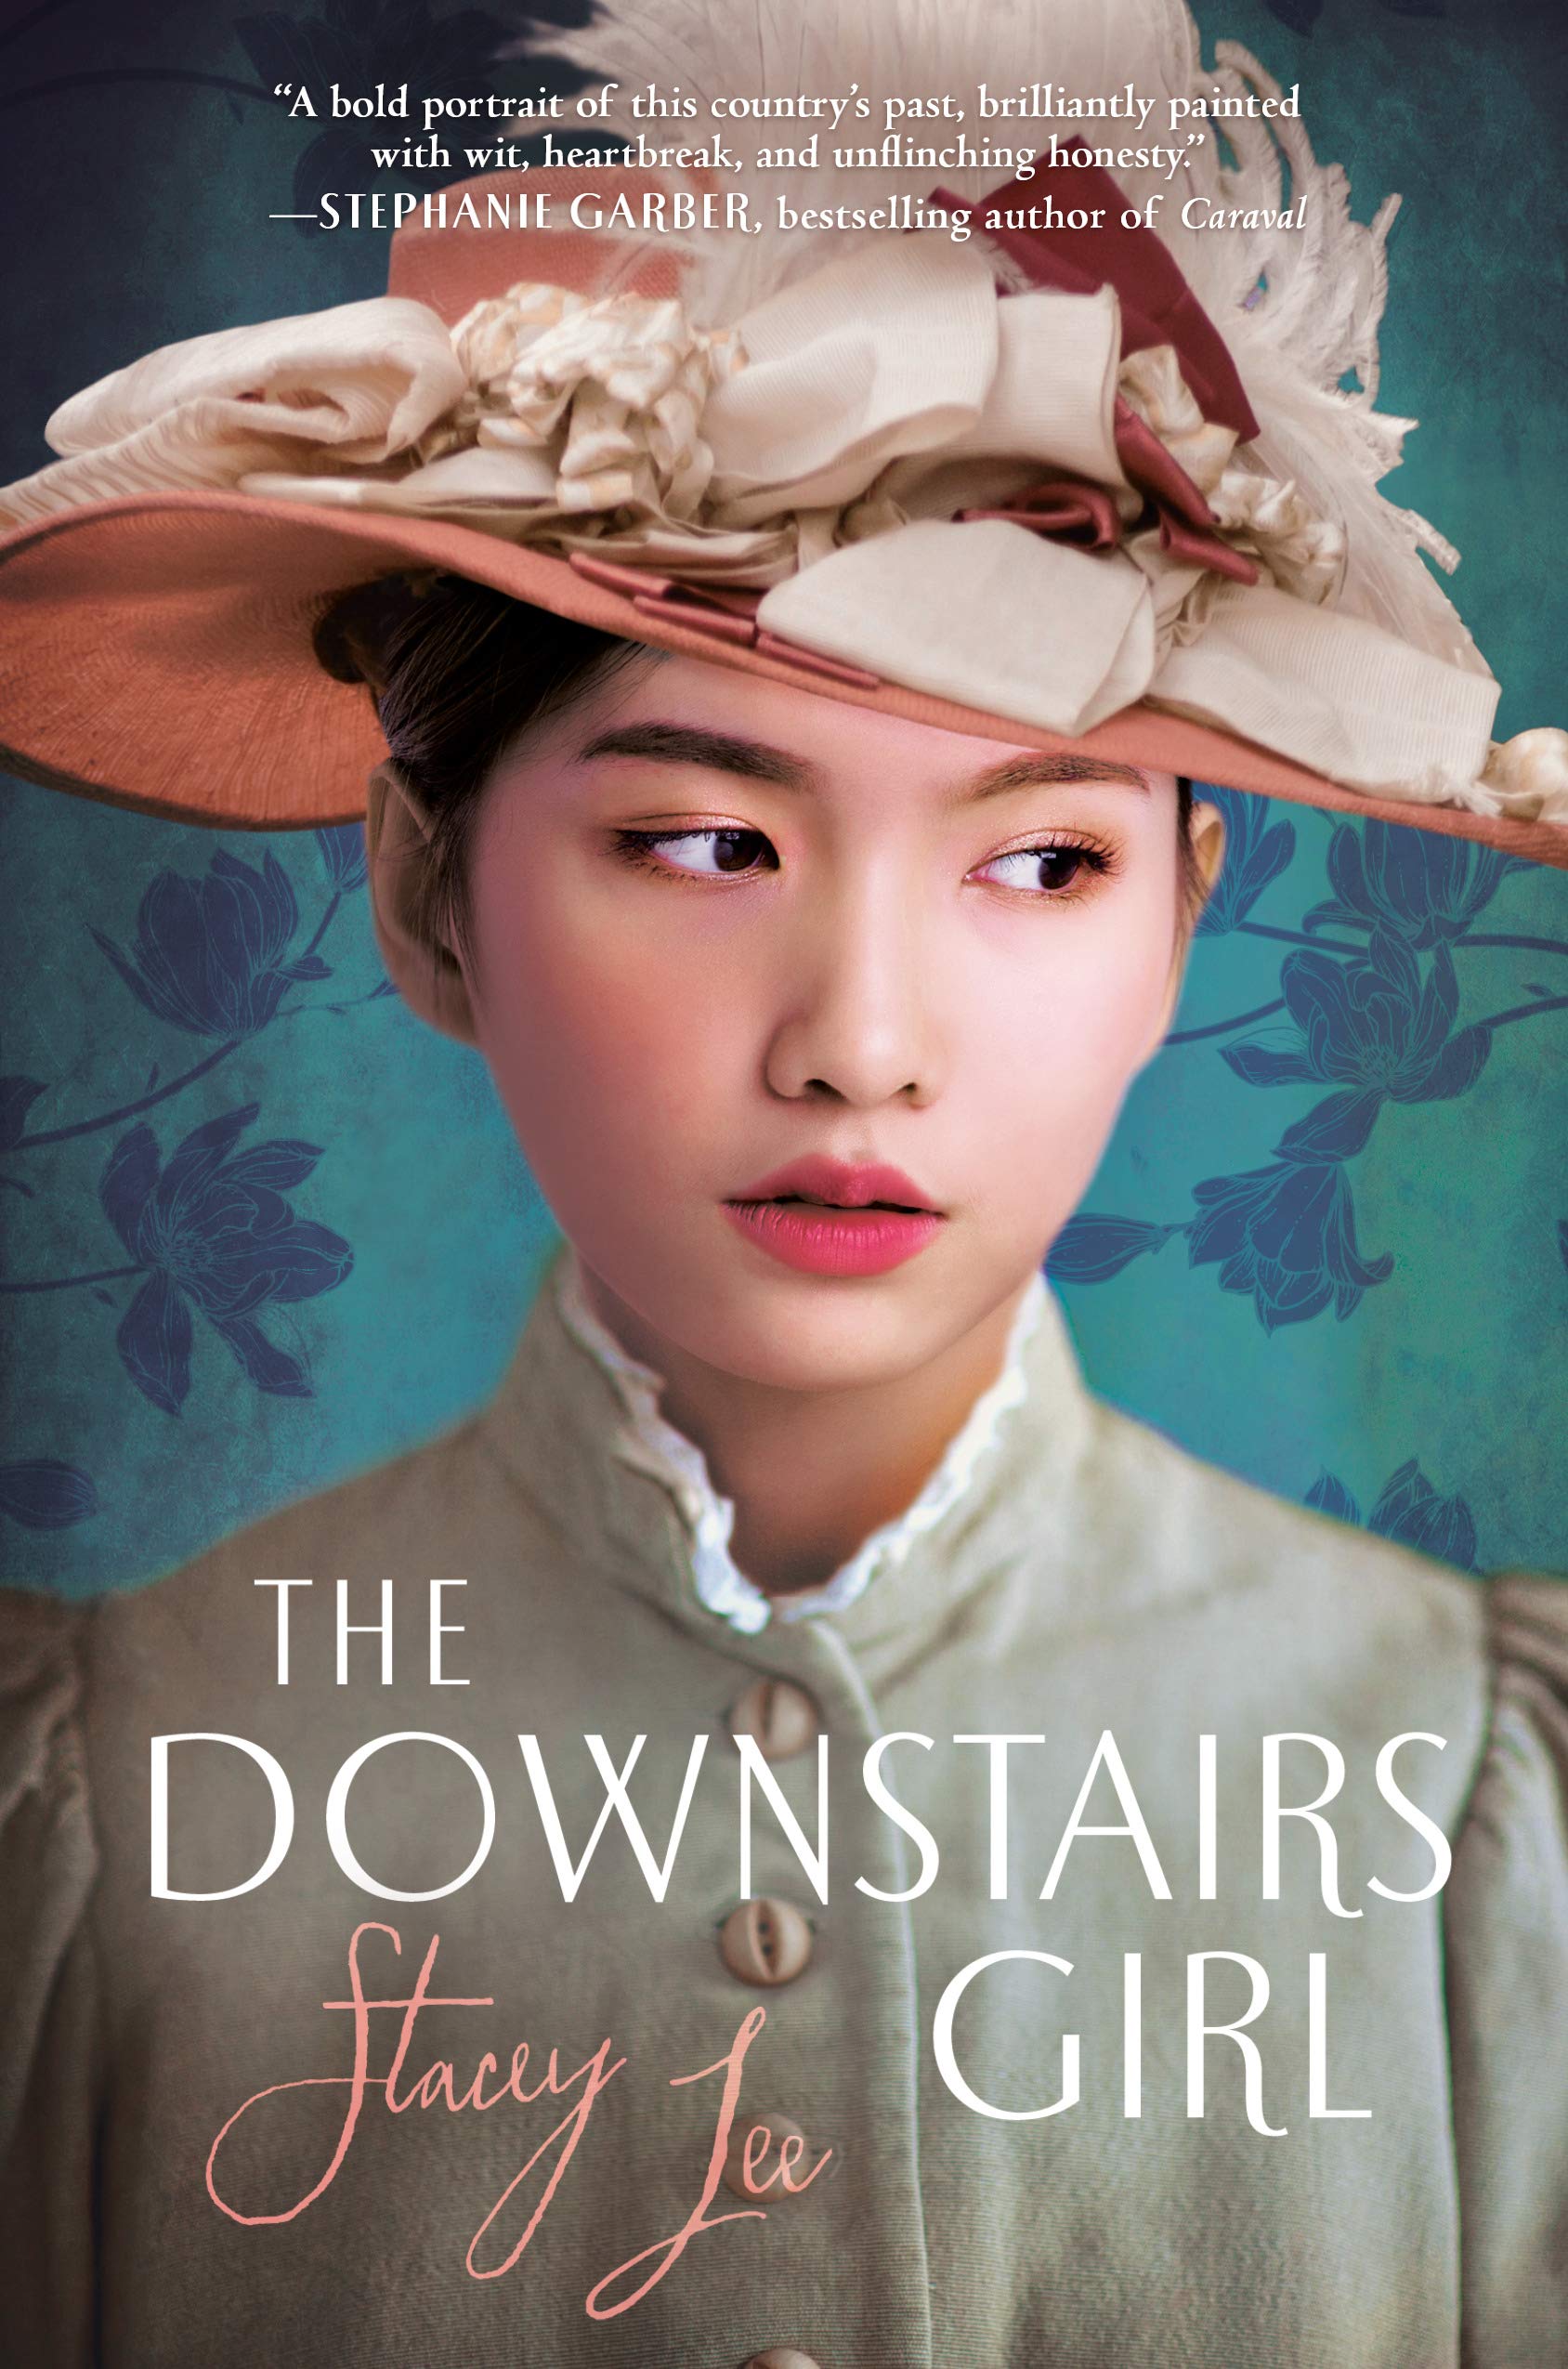 Graphic image of the book cover of The Downstairs Girl